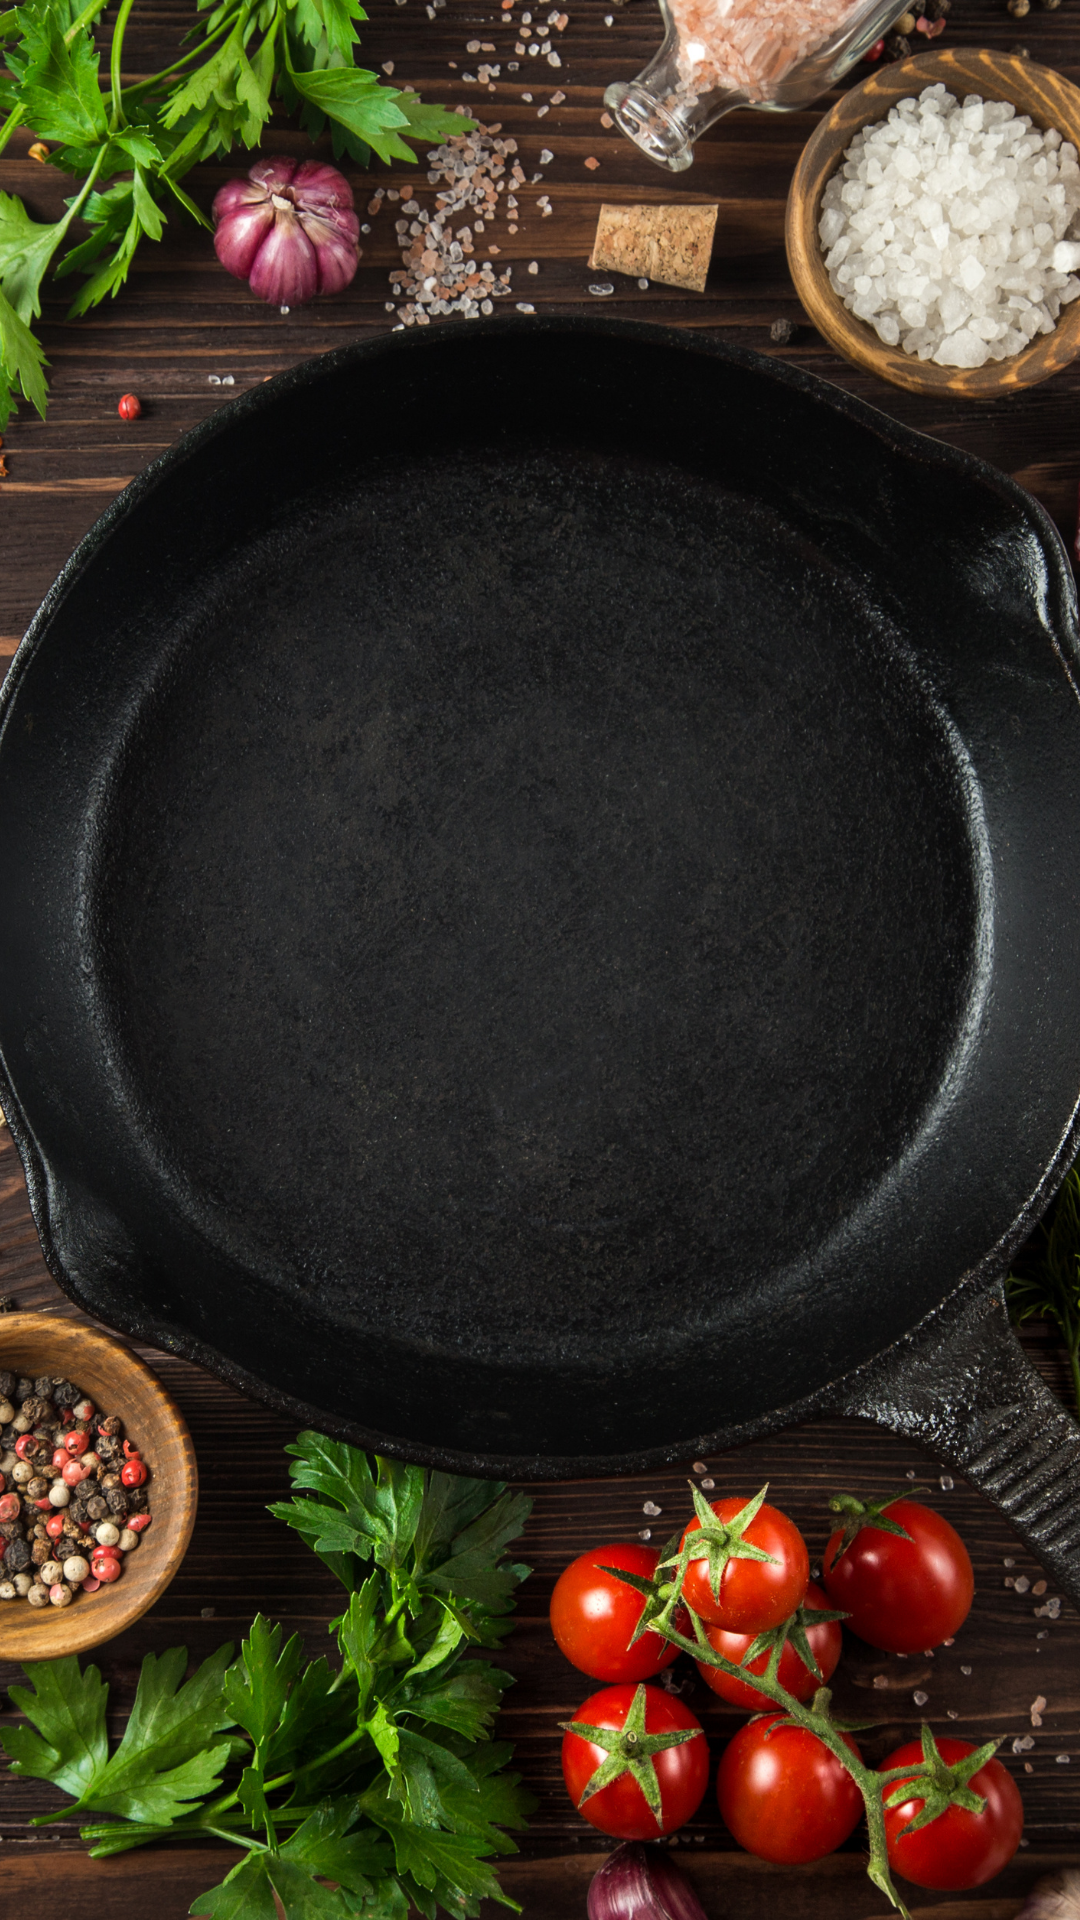 The 10 Commandments to Cooking With a Wok